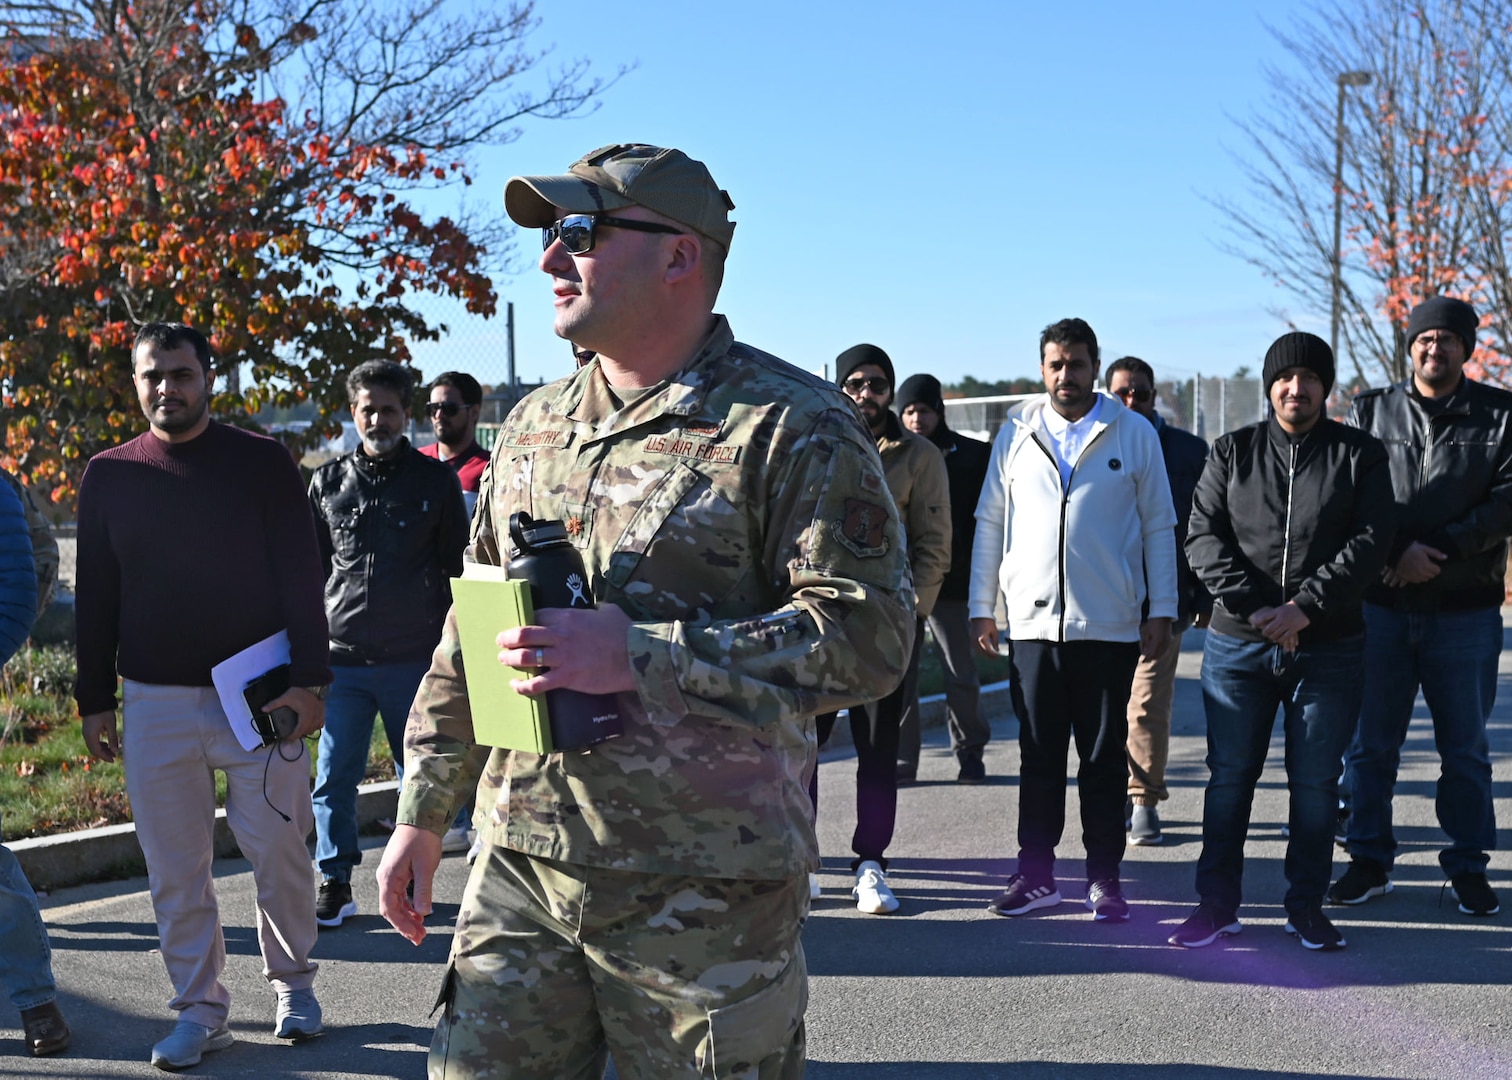 Maj. Aaron McCarthy, NHNG Counterdrug Program coordinator, leads a delegation from the General Directorate of Narcotics Control, Kingdom of Saudi Arabia, on a tour of the Army Aviation Support Facility on Nov. 3 in Concord.